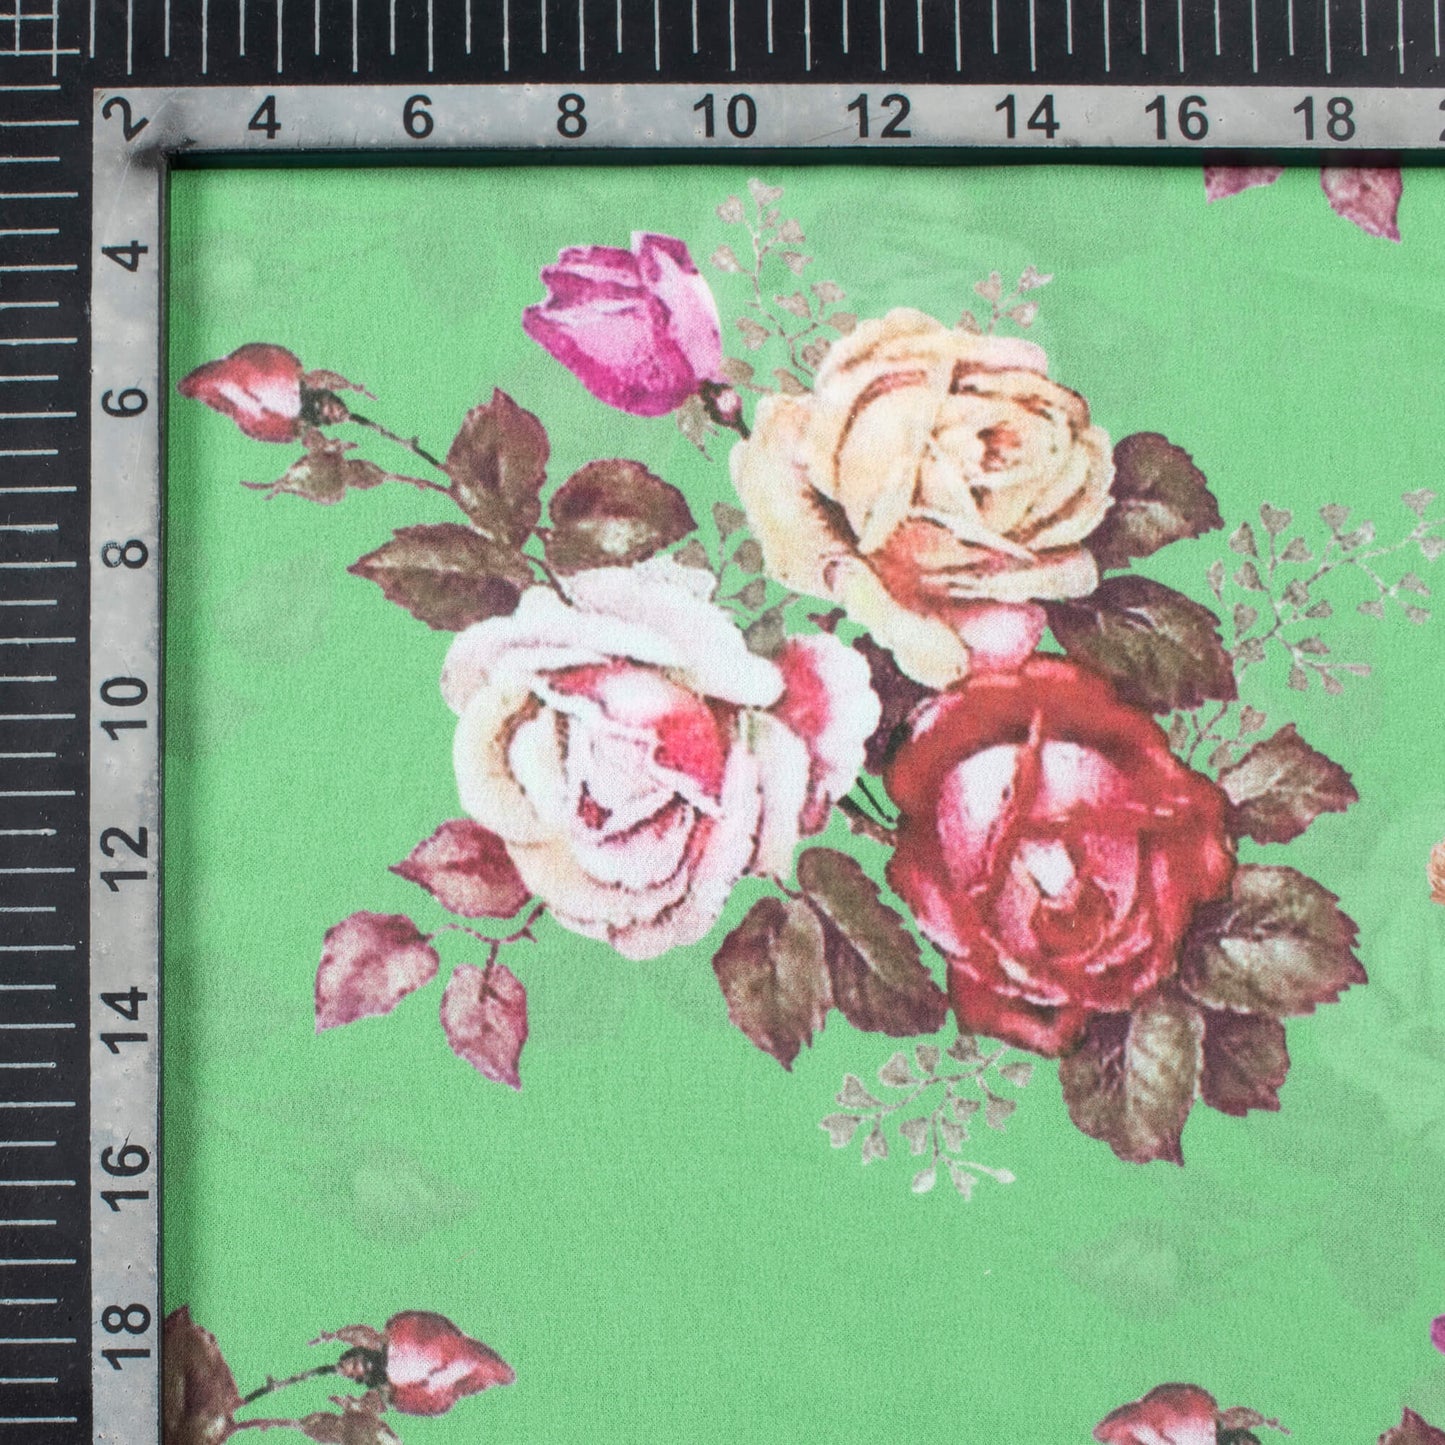 (Cut Piece 2.5 Mtr) Paris Green And Rosewood Pink Floral Pattern Digital Print Georgette Fabric